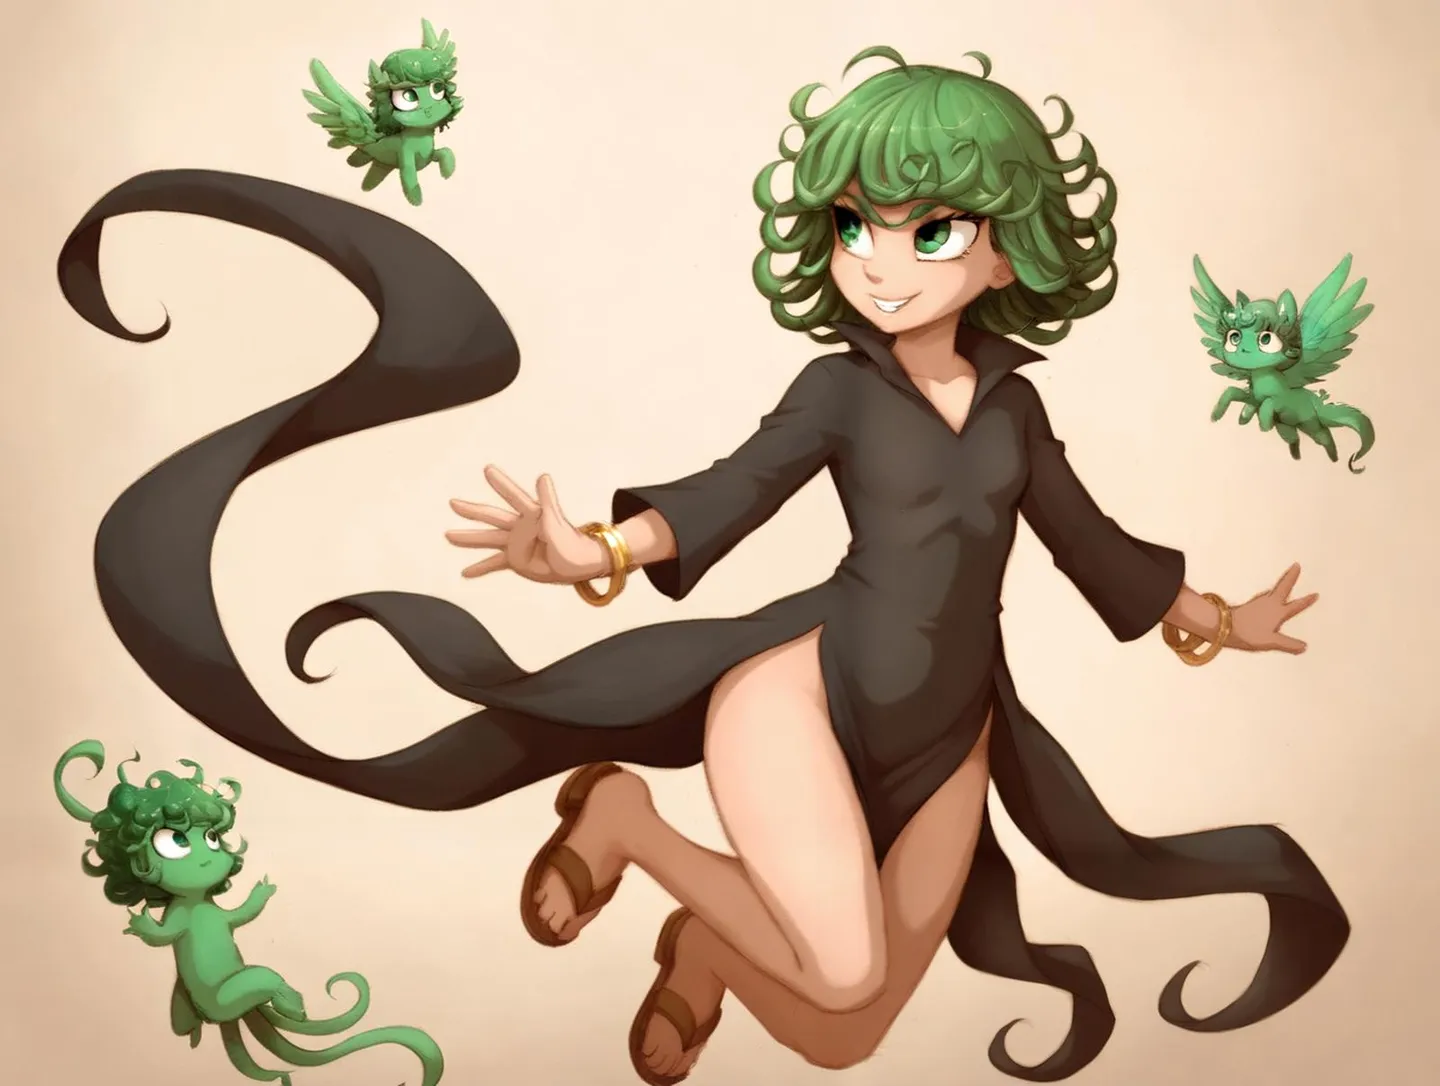 An AI generated image using stable diffusion depicting an anime-style girl with green hair, wearing a black dress, and surrounded by three small fantasy creatures.